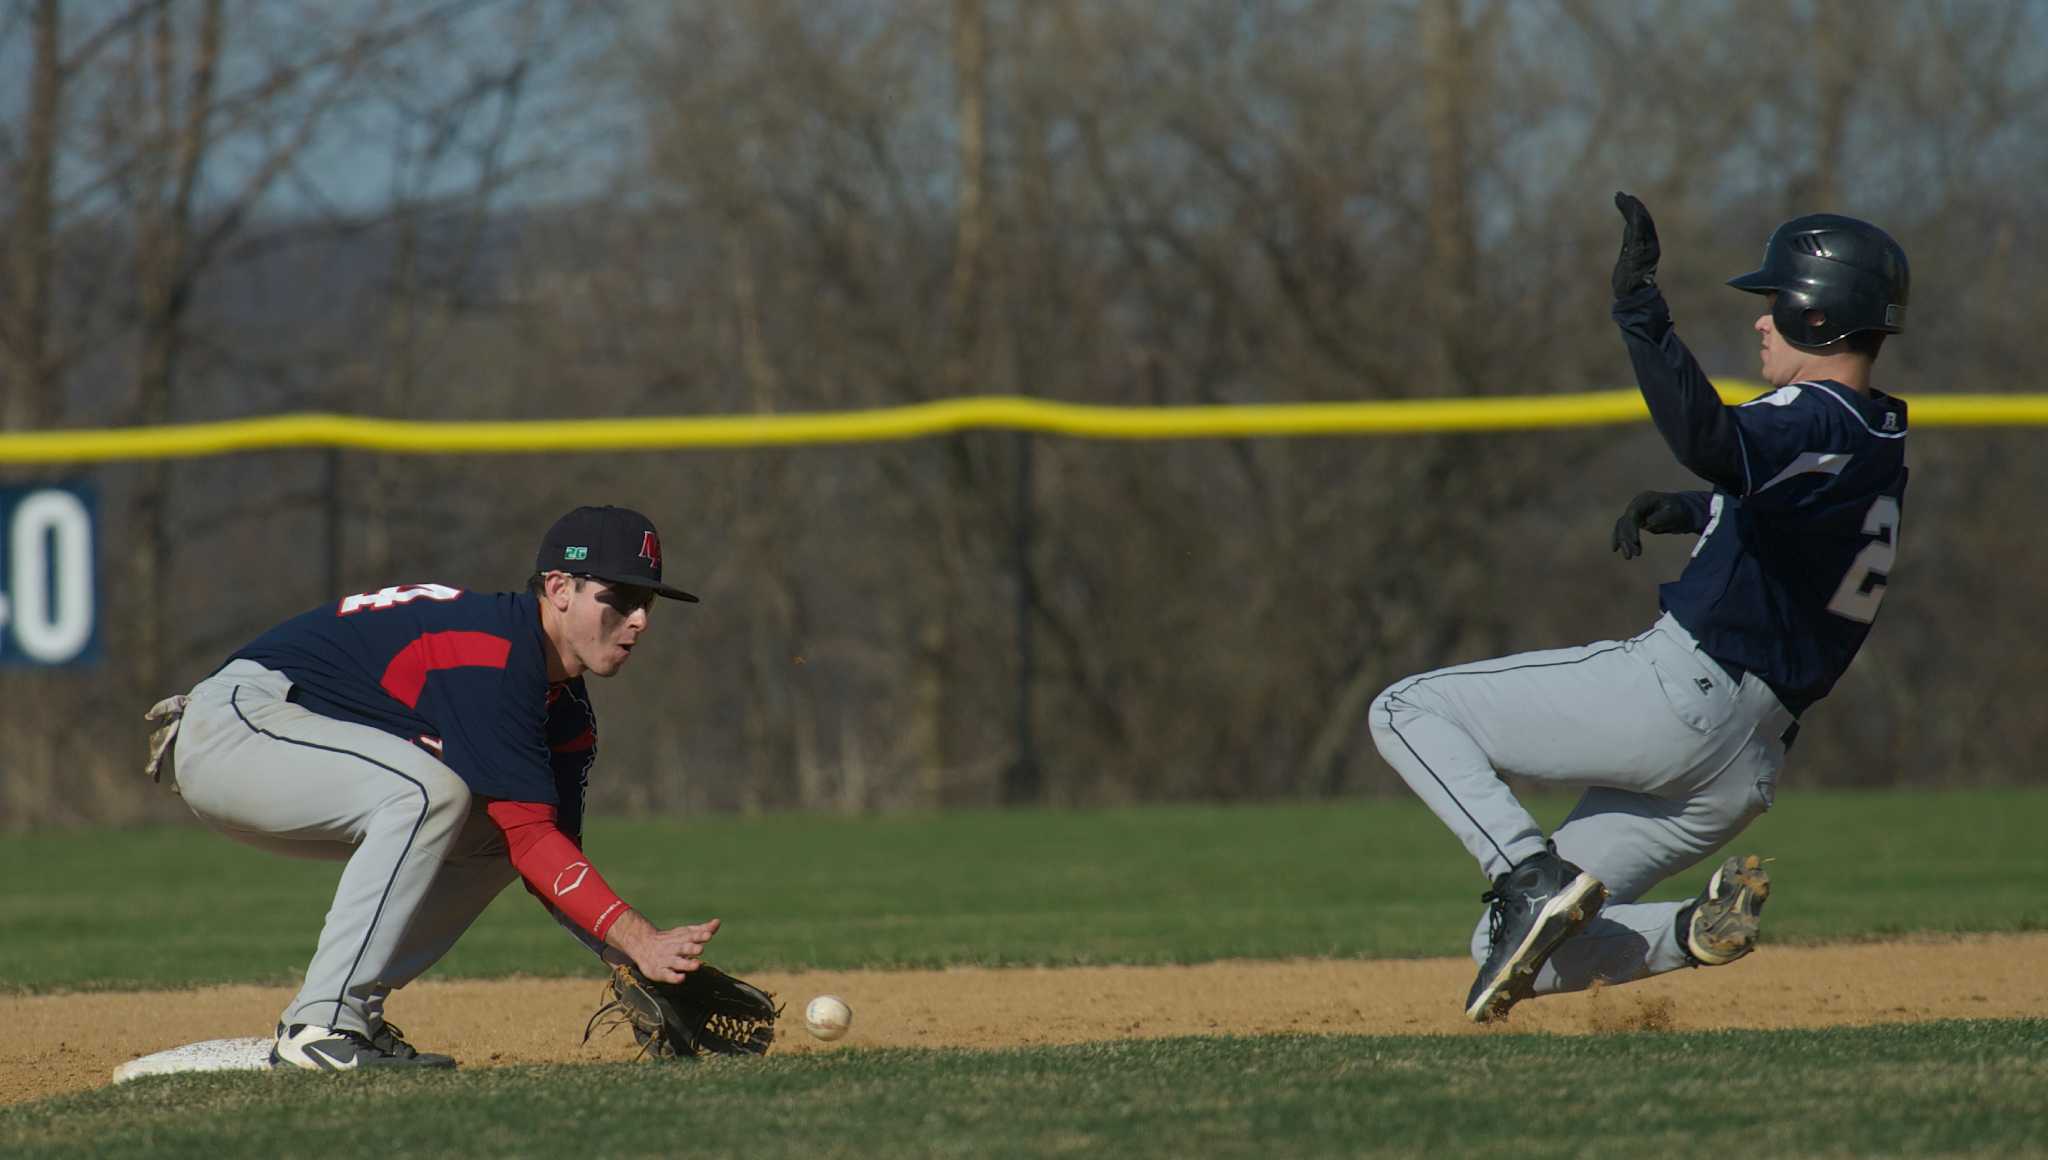 Fredette, Immaculate baseball team hold off New Fairfield